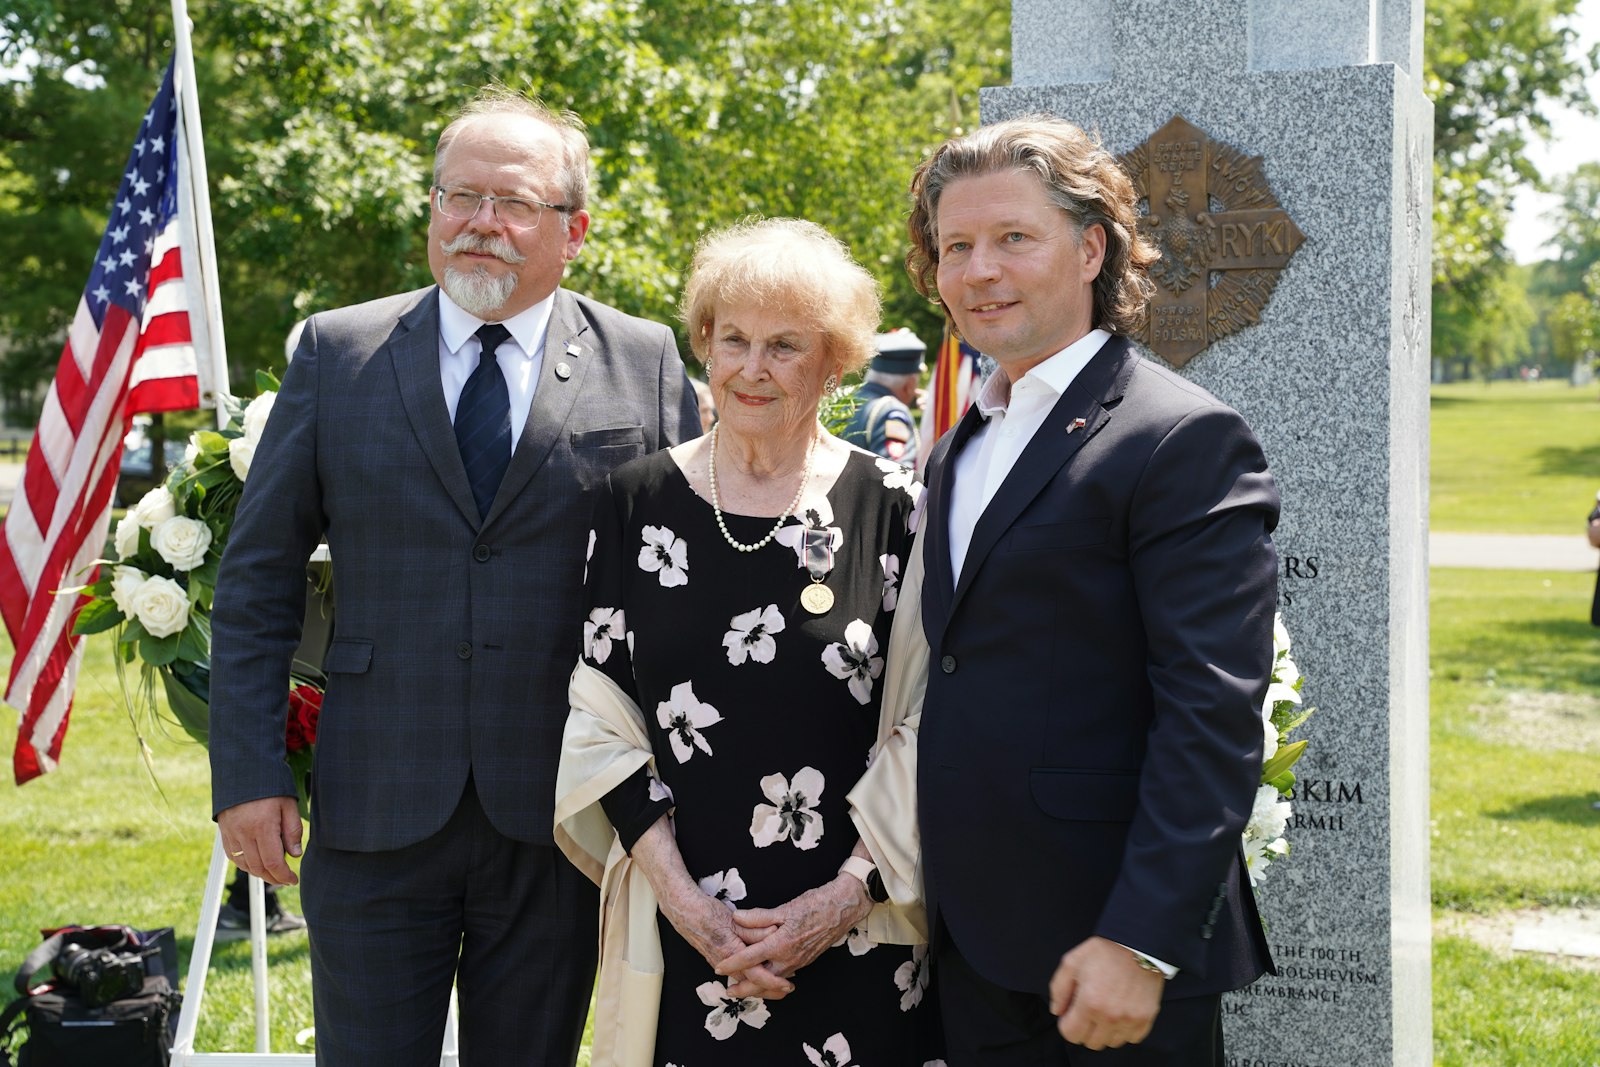 Adam Siwek, director of the Office for Commemorating of the Struggle and Martyrdom, Henrietta Nowakowski, and Arkadiusz Gorecki, former director of the Polish Mission at Orchard Lake, stand before the newly dedicated monument to the Polish Blue Army volunteers.